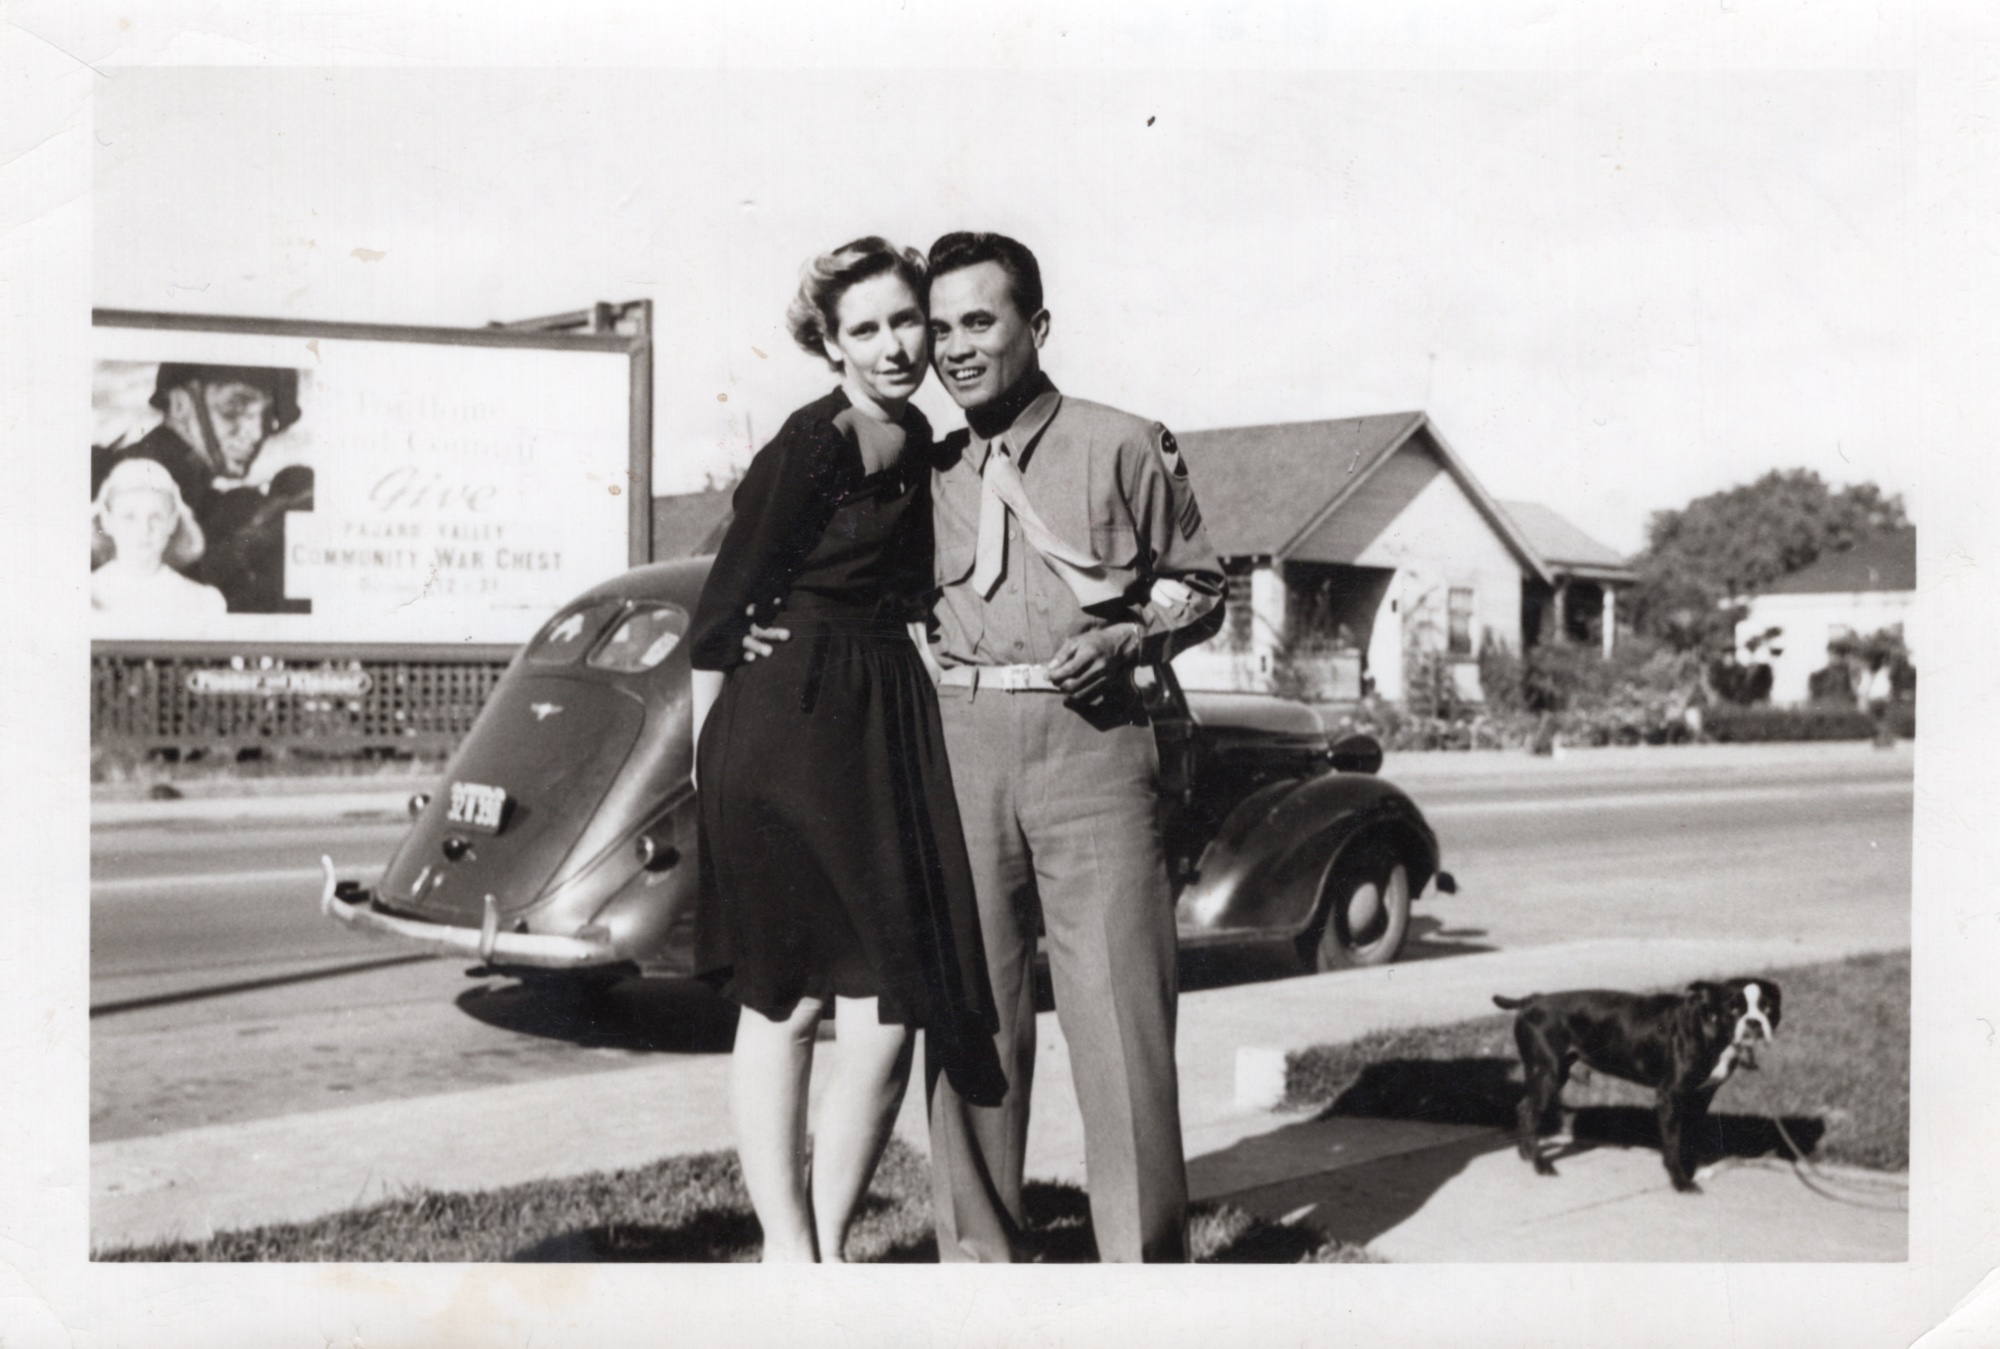 Black and white photo of a couple in the 1940s, standing in front of a car and billboard